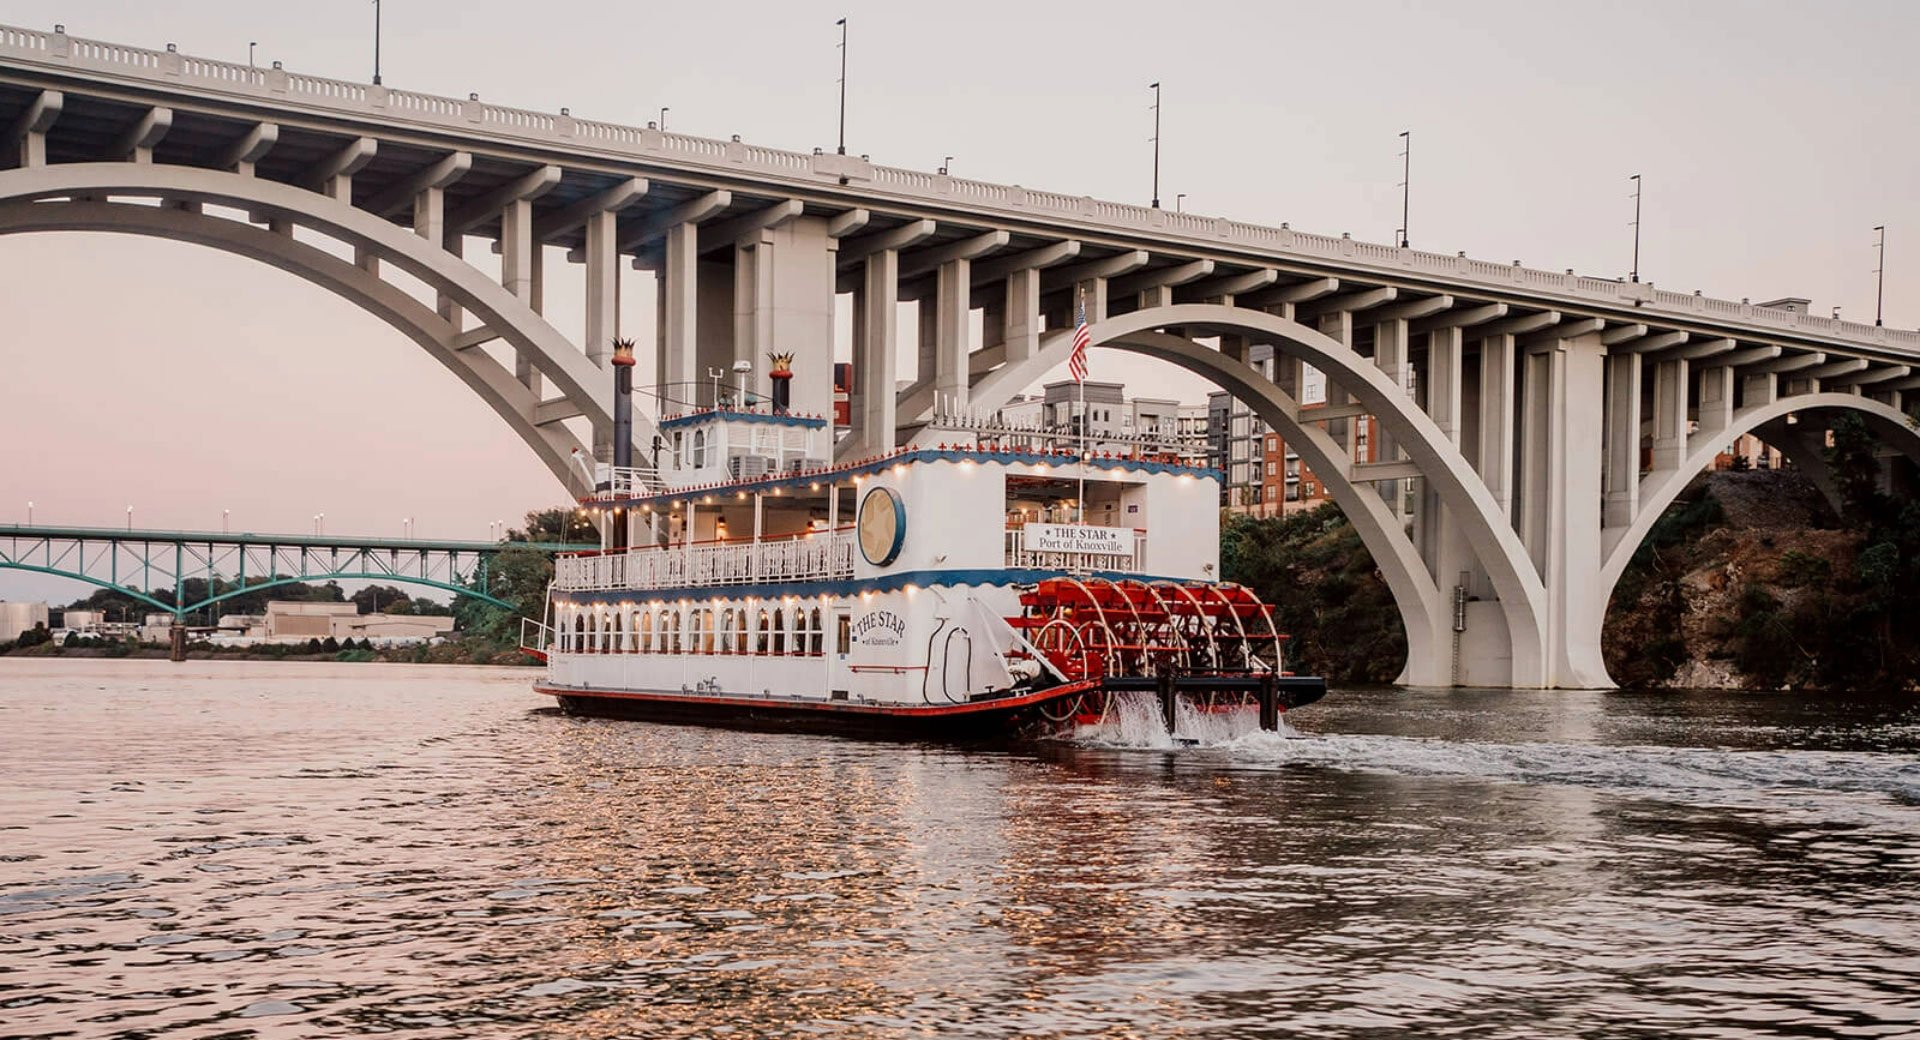 Tennessee River boat with a bridge in foreground